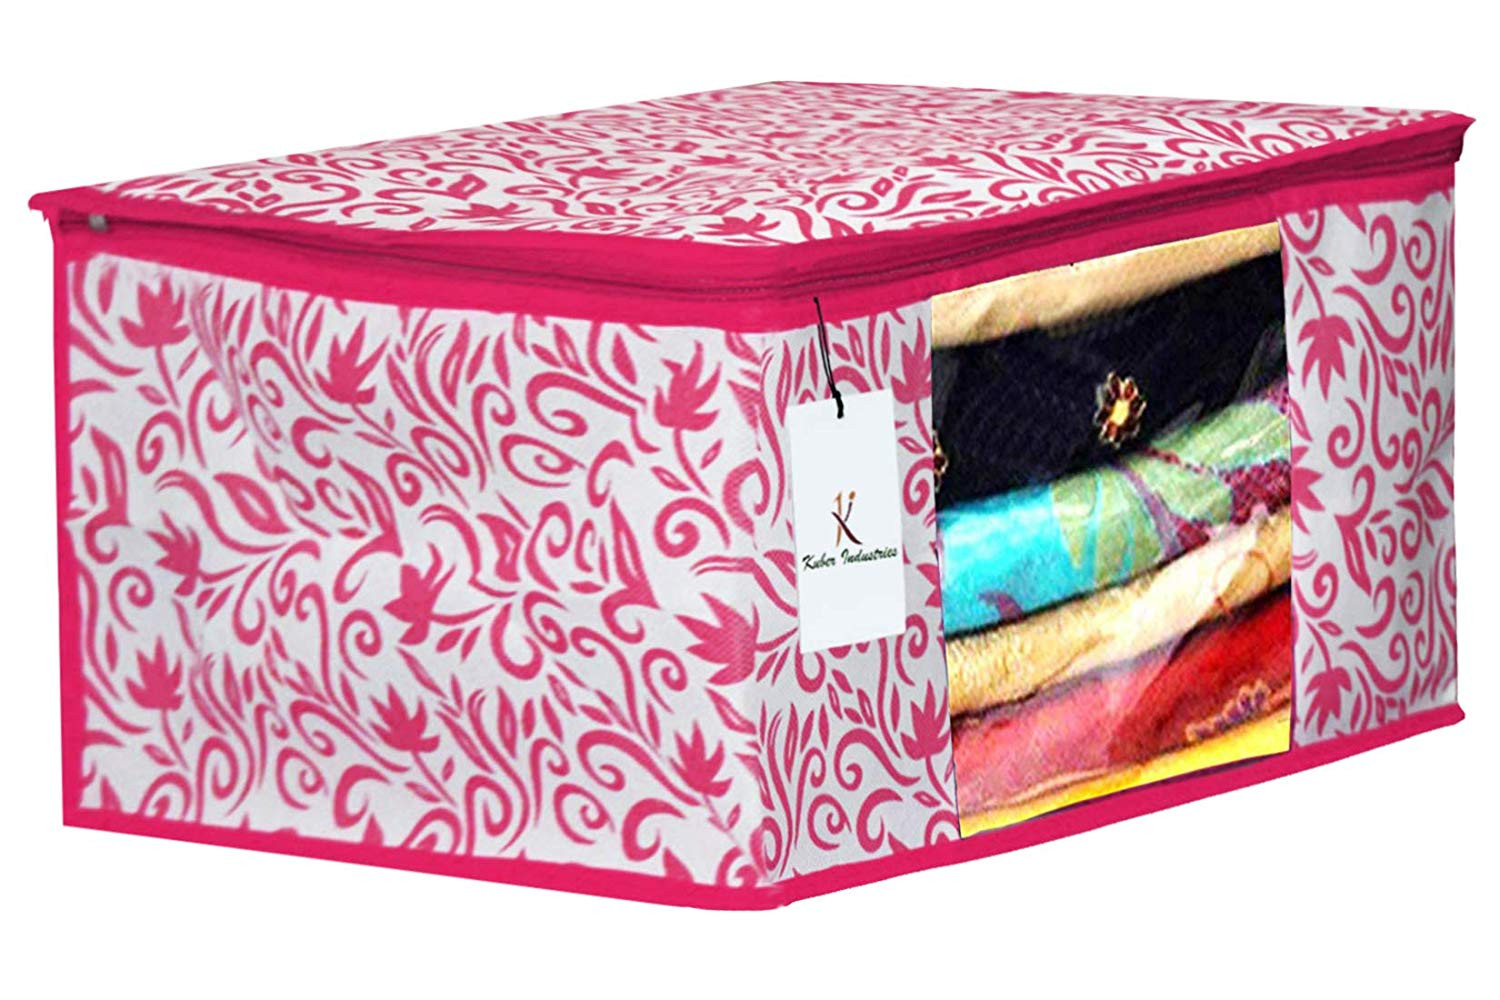 Kuber Industries Leaf Design Non Woven Saree Cover And Underbed Storage Bag, Cloth Organizer For Storage, Blanket Cover Combo Set (Pink) -CTKTC38655